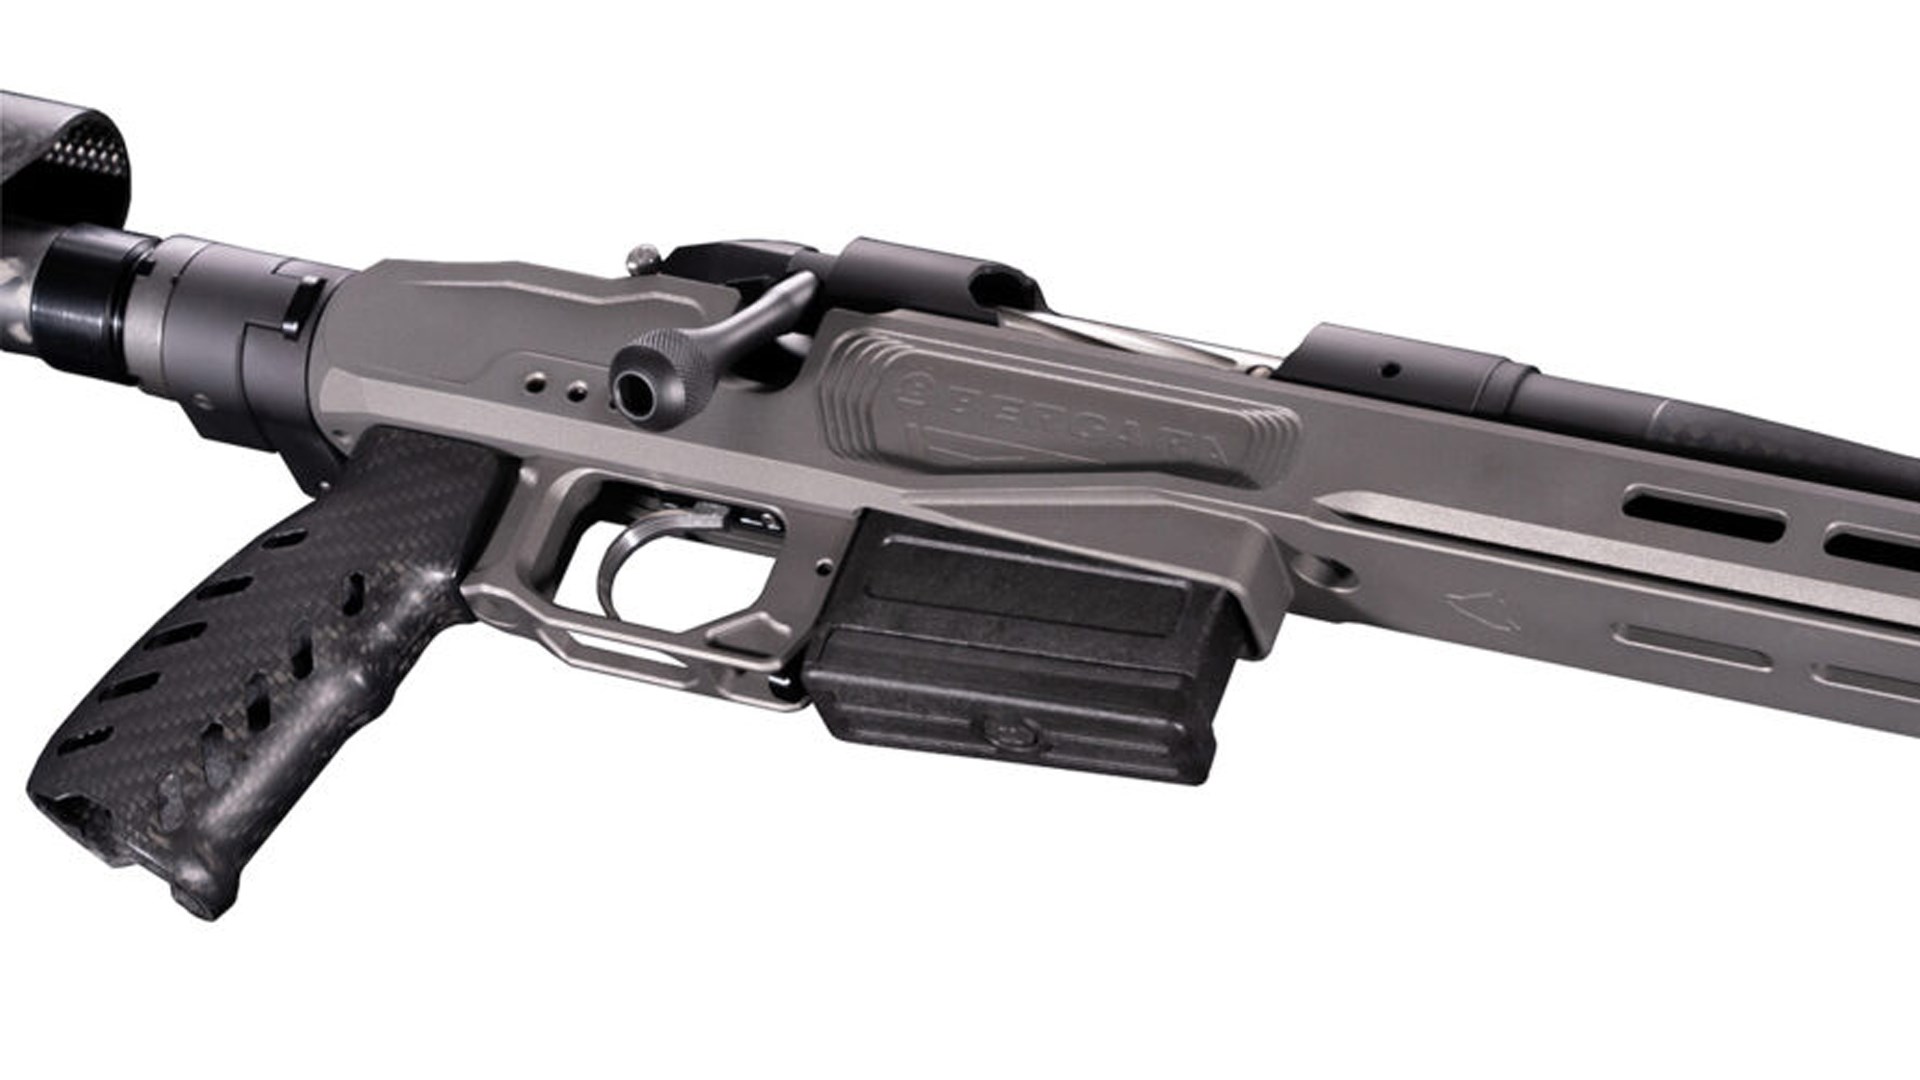 Action, pistol grip and magazine of the Bergara MgMicro Lite rifle.